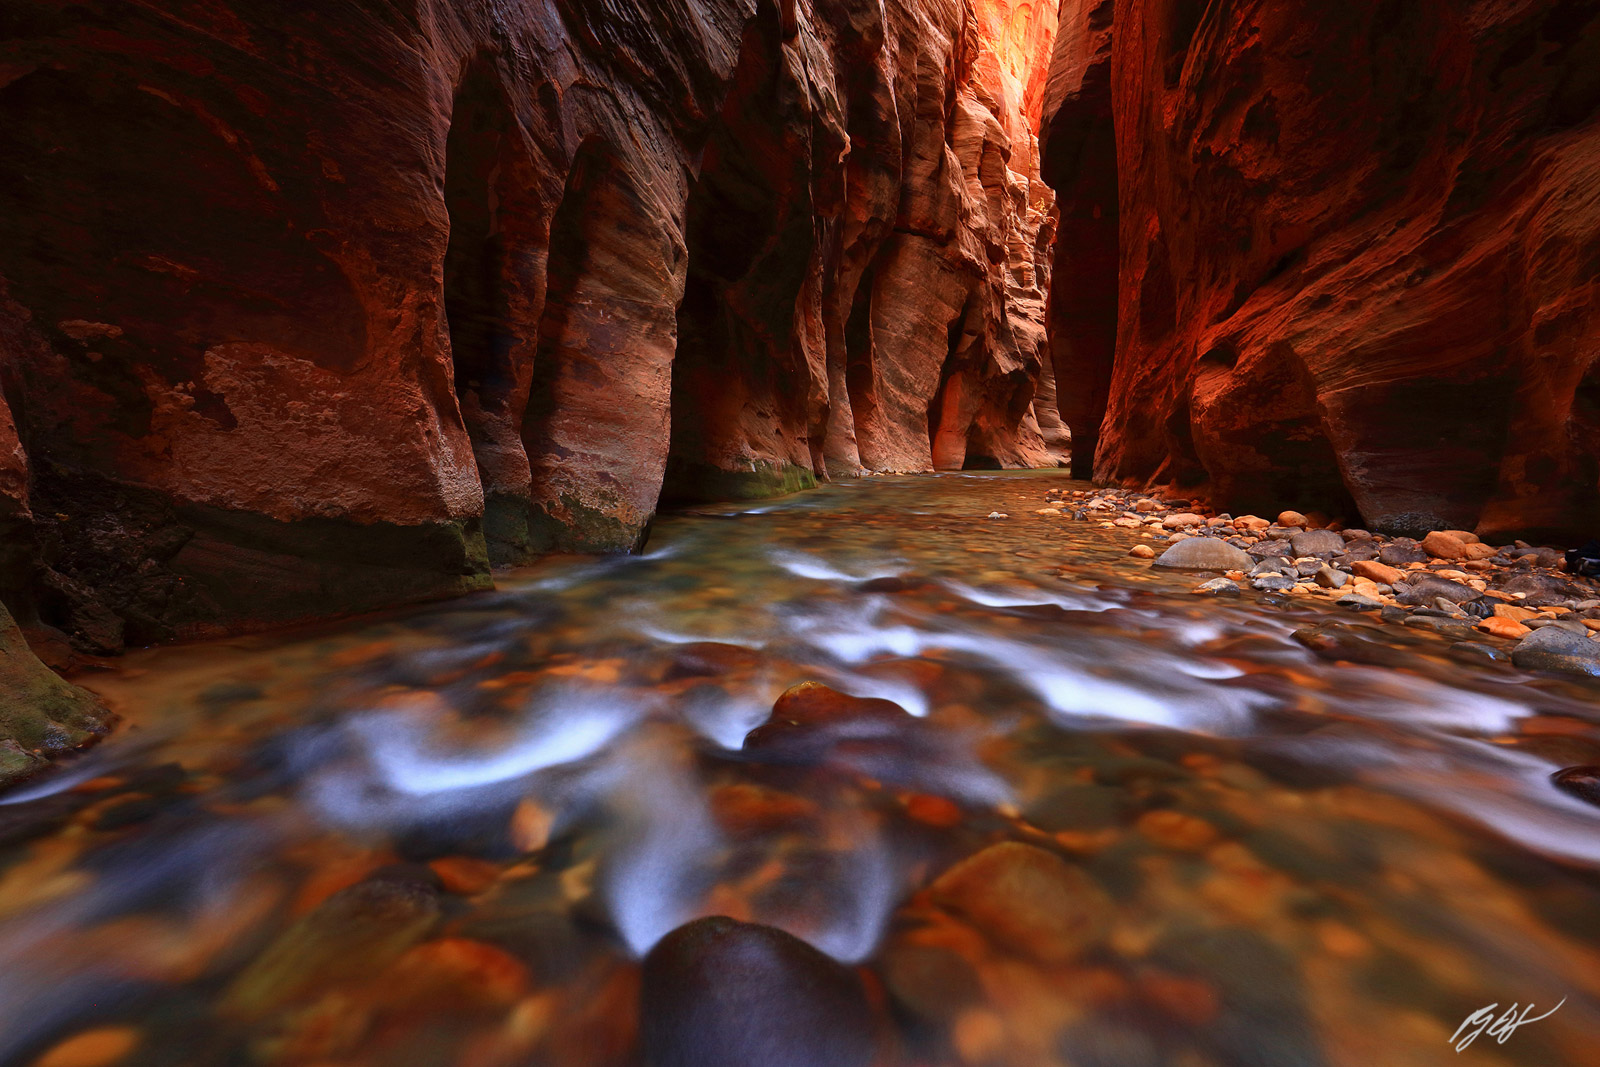 The Narrows and the Virgin River in Zion National Park in Utah